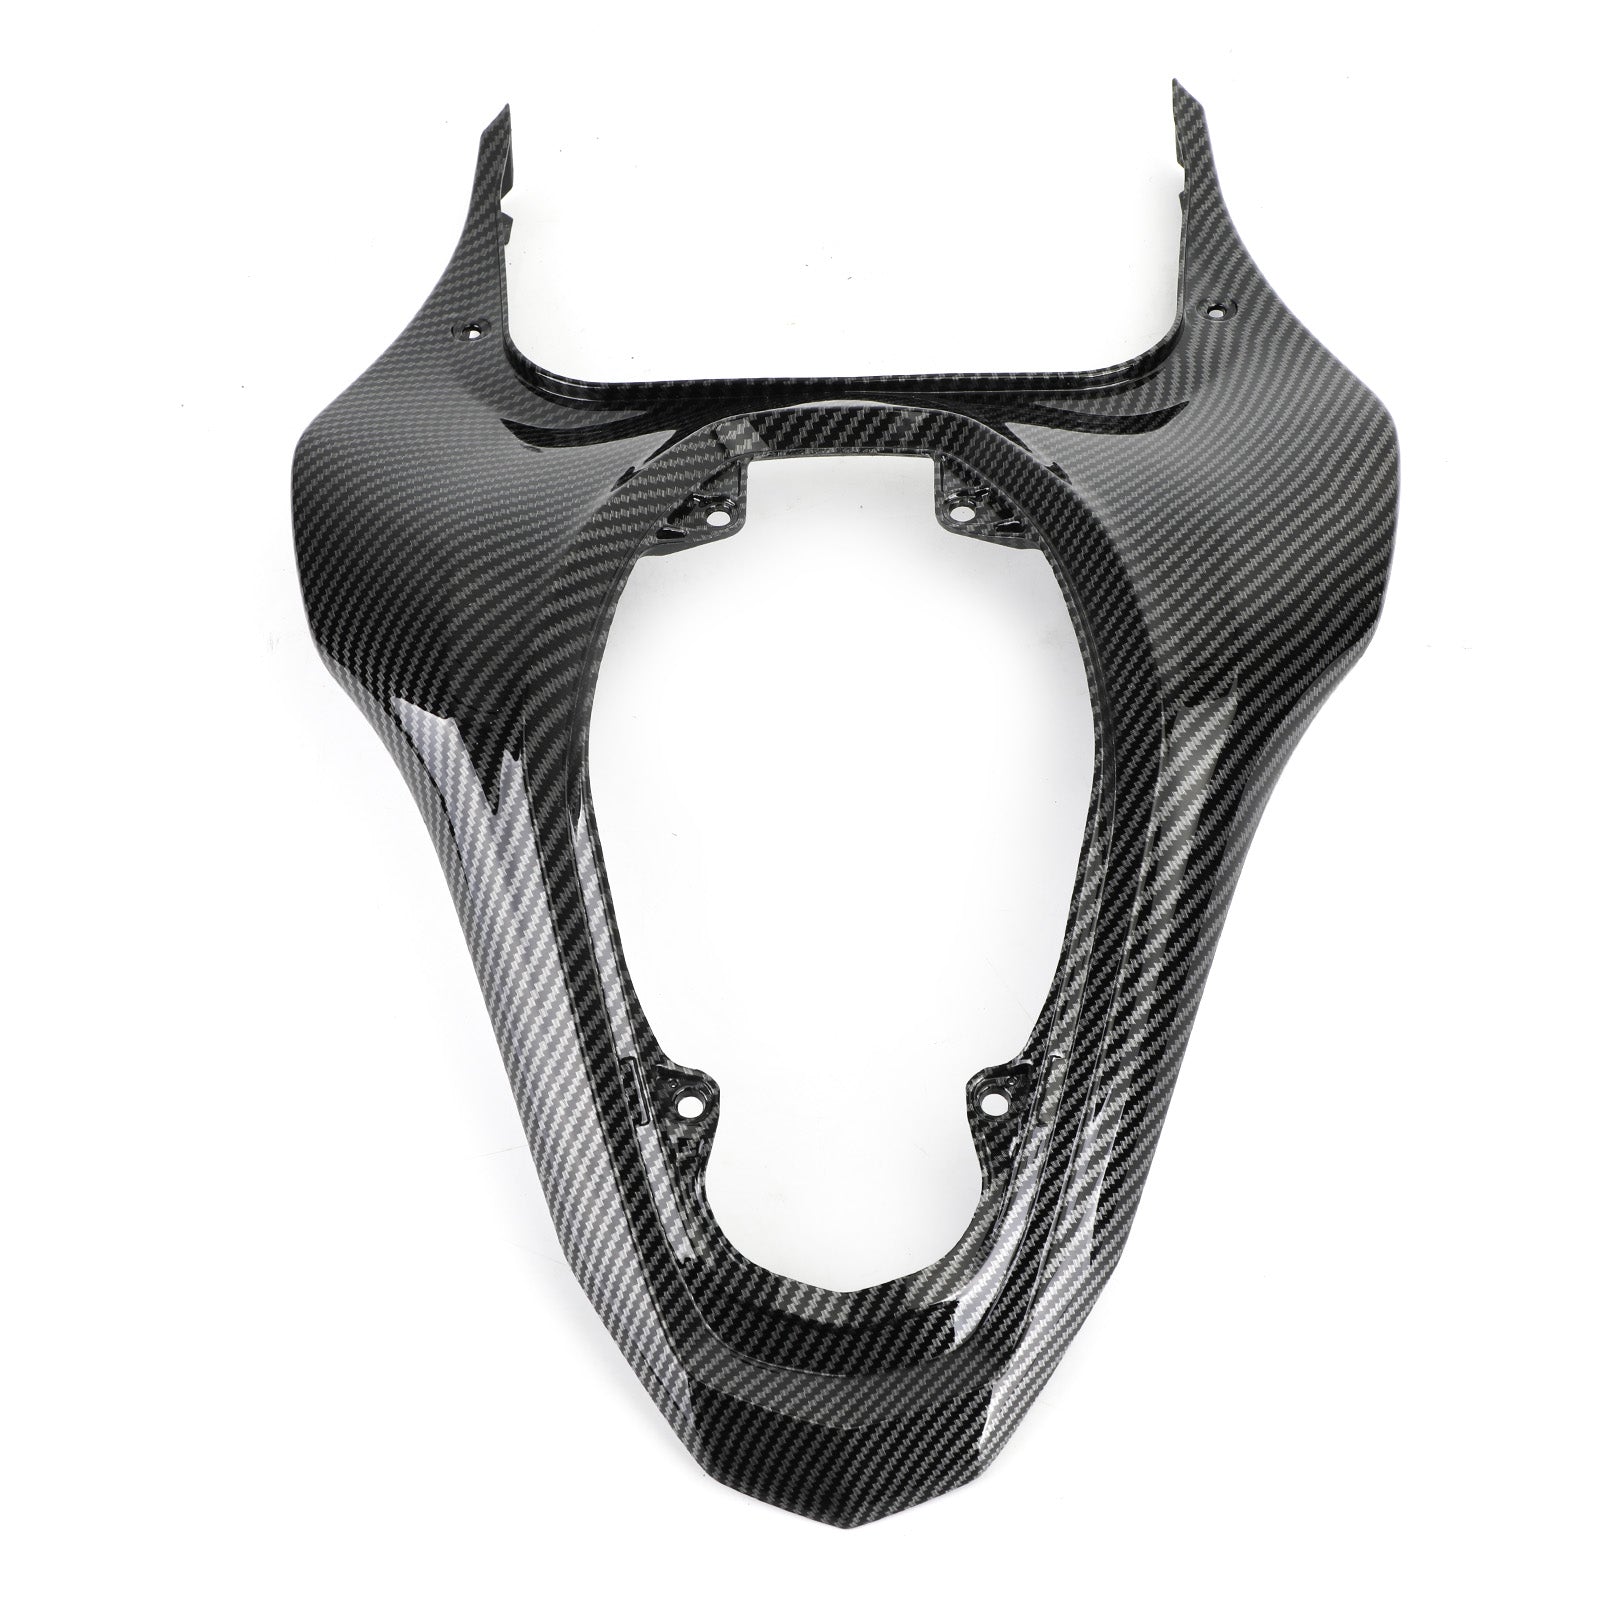 Motorcycle Rear Seat Fairing Cover Cowl Fit for Kawasaki Z900 2017-2019 Carbon